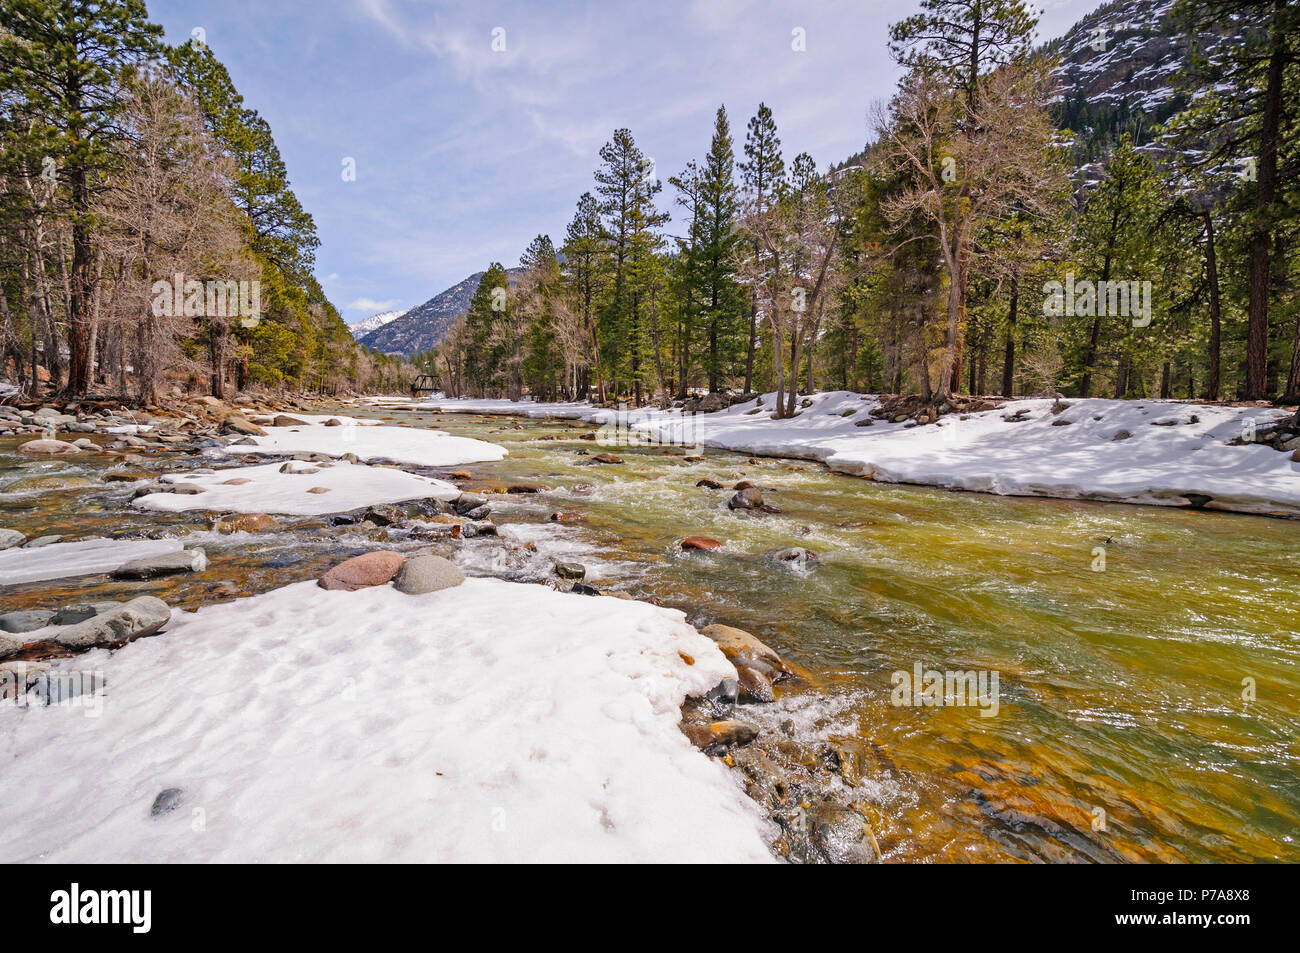 The Animas river in Colorado flowing fast with winder snowmelt Stock Photo